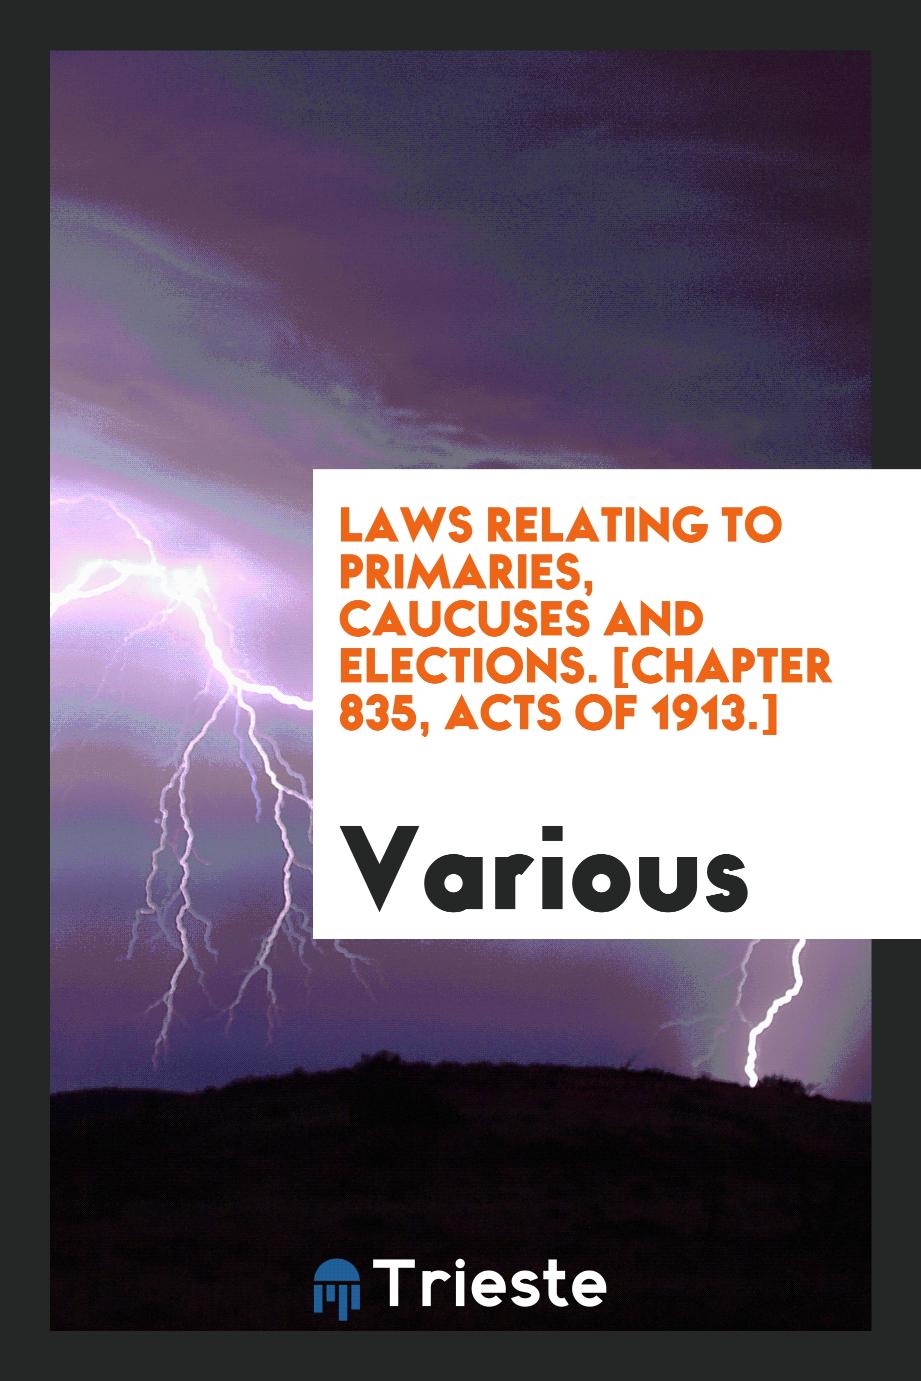 Laws relating to primaries, caucuses and elections. [Chapter 835, Acts of 1913.]